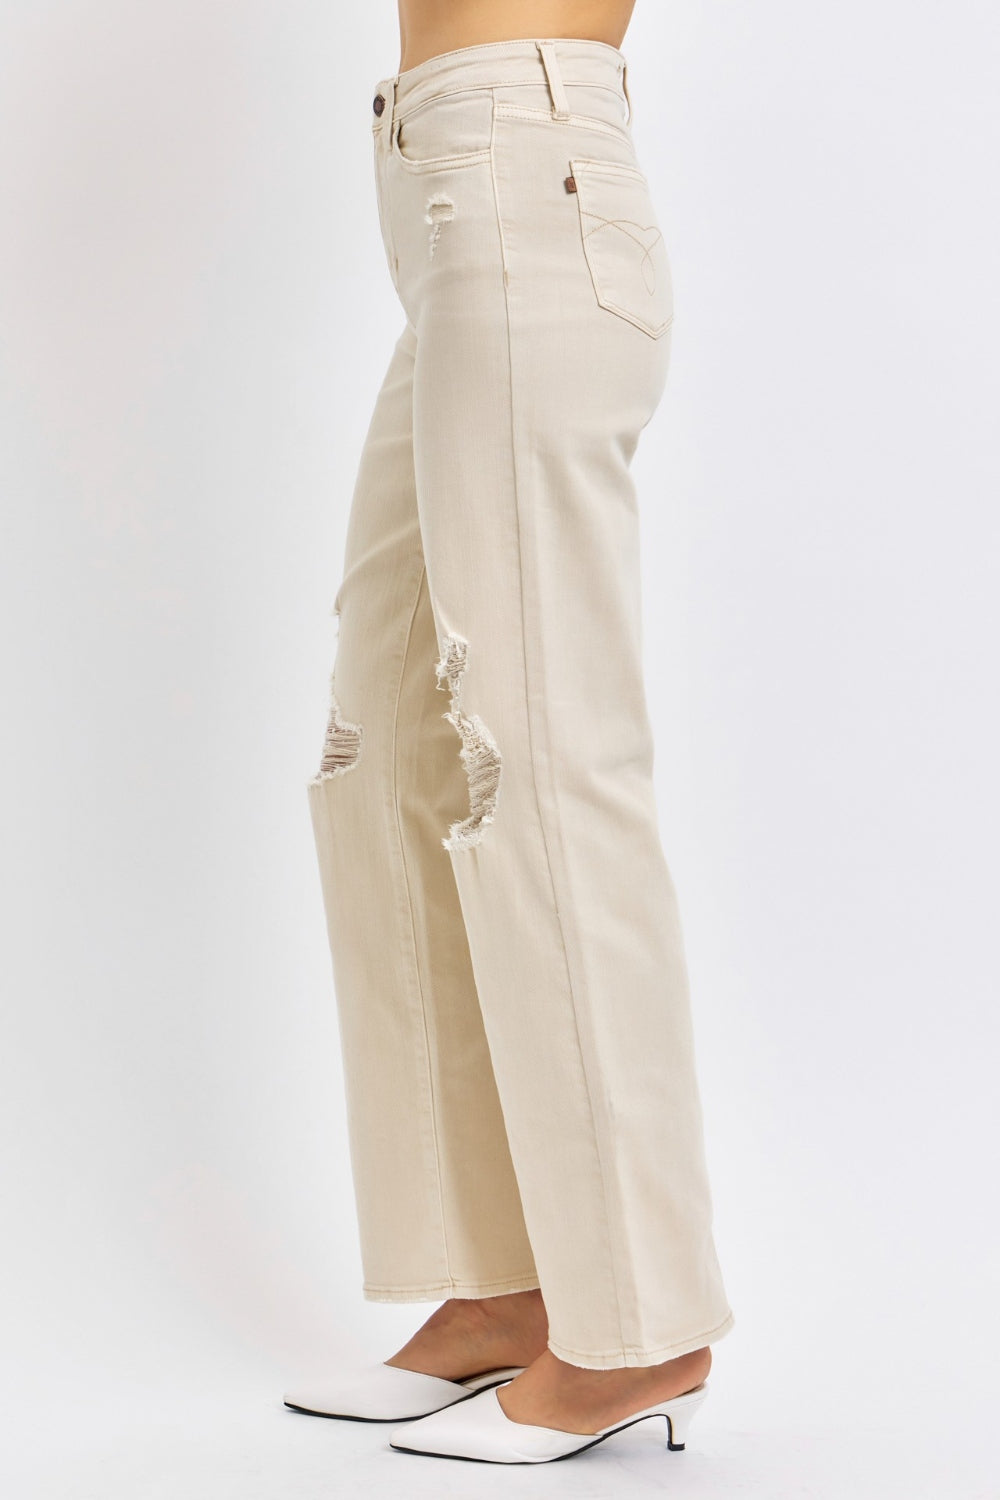 Judy Blue High Waist Distressed Wide Leg Jeans in Bone Southern Soul Collectives